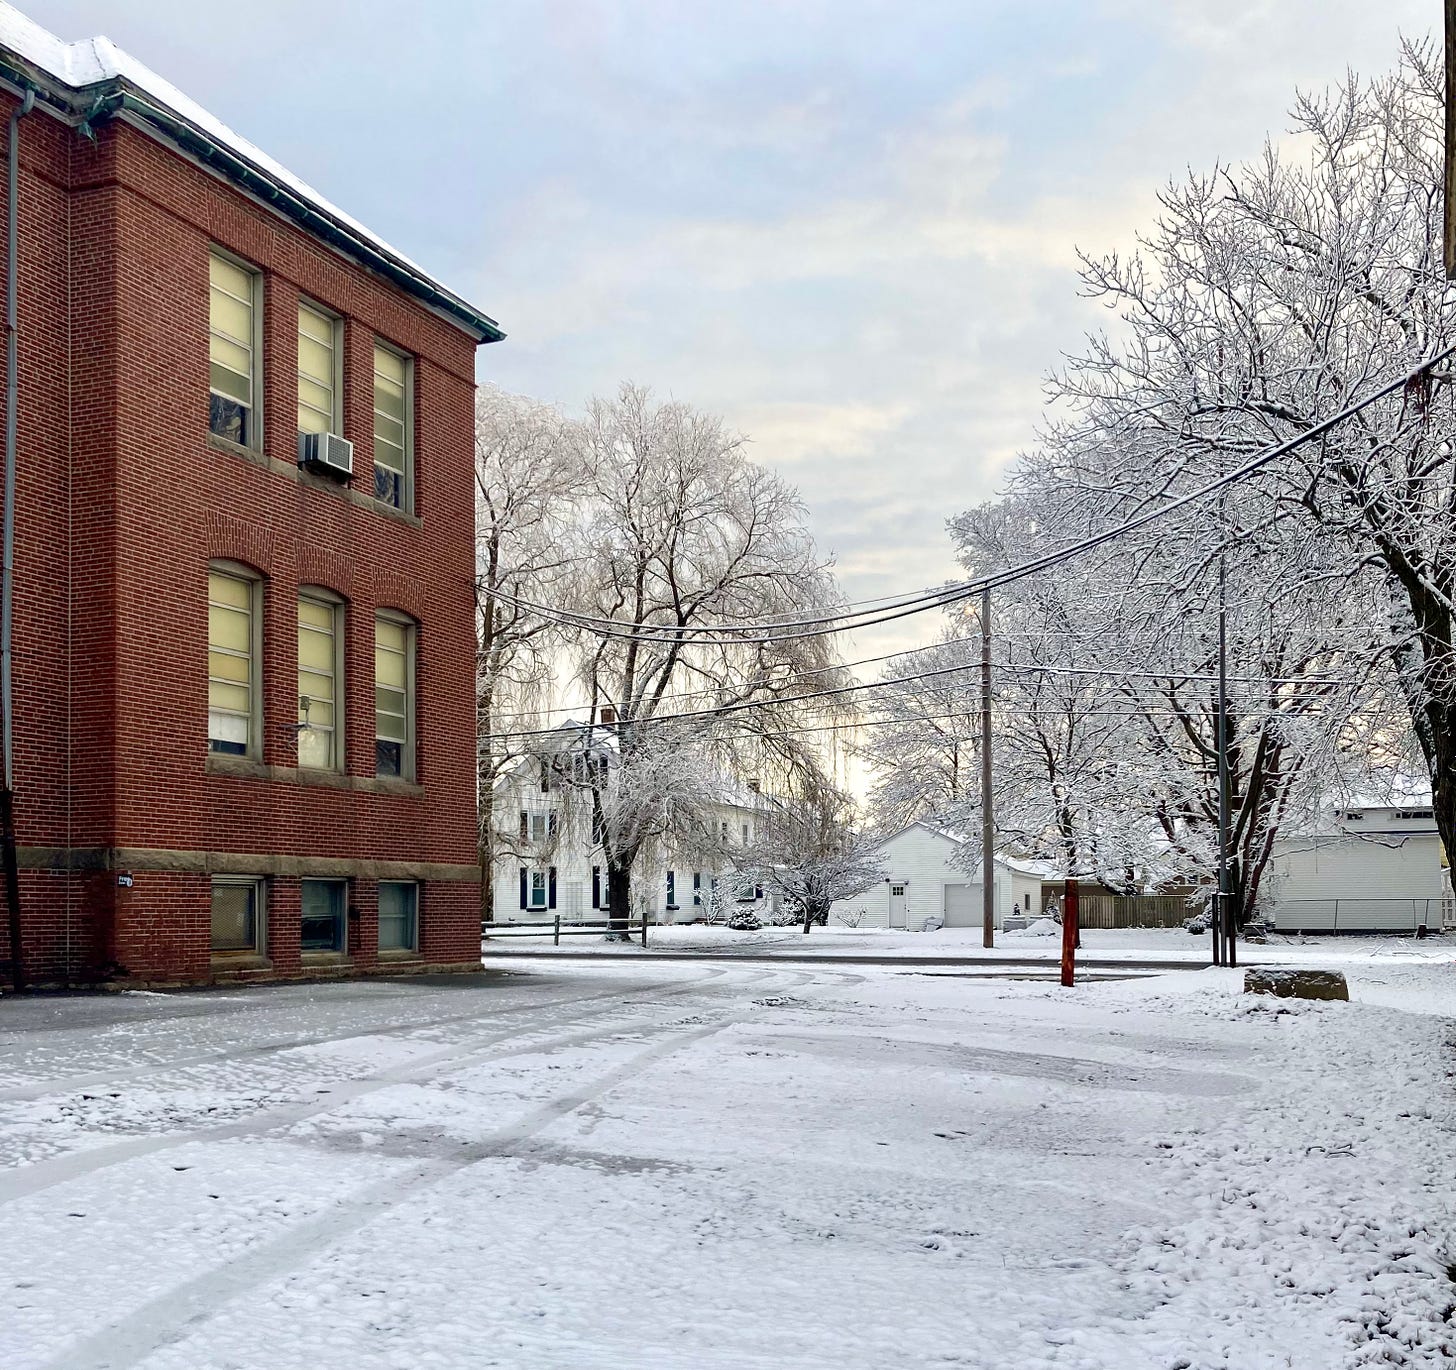 A morning scene of a snowy parking lot by a brick building